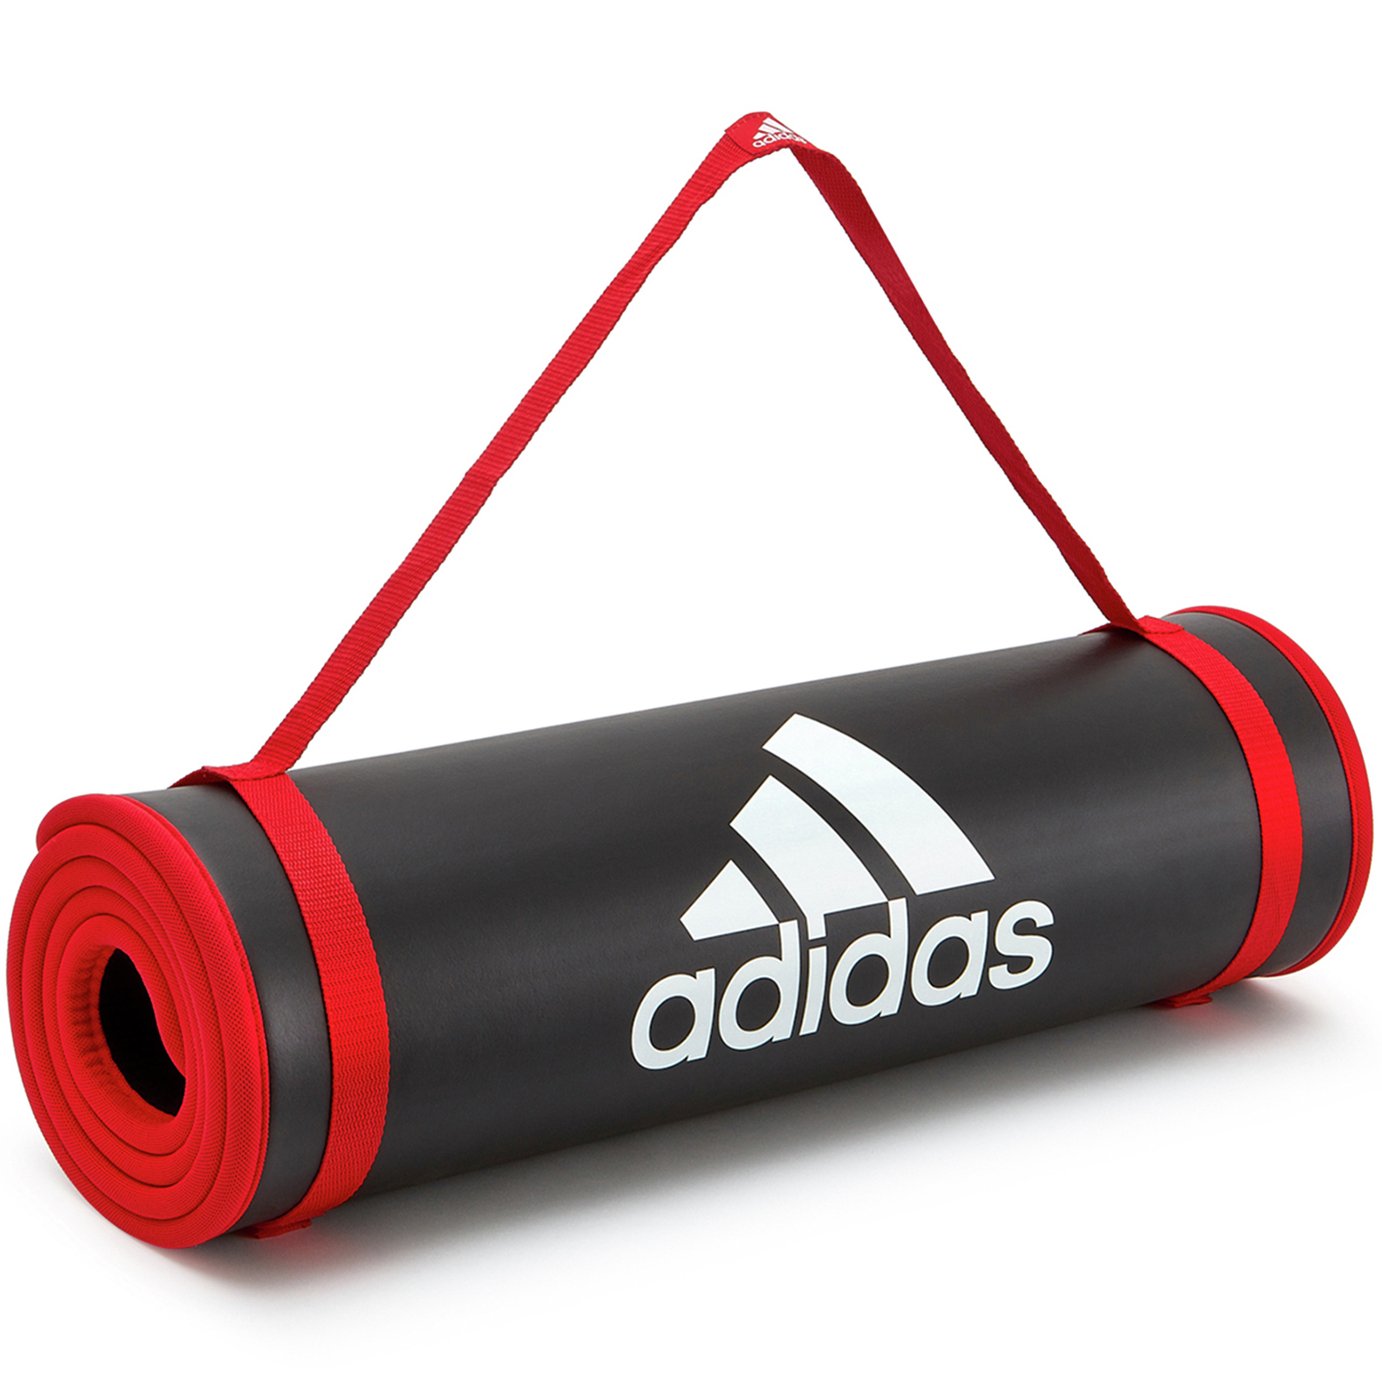 Adidas 10mm Thickness Yoga Exercise Mat